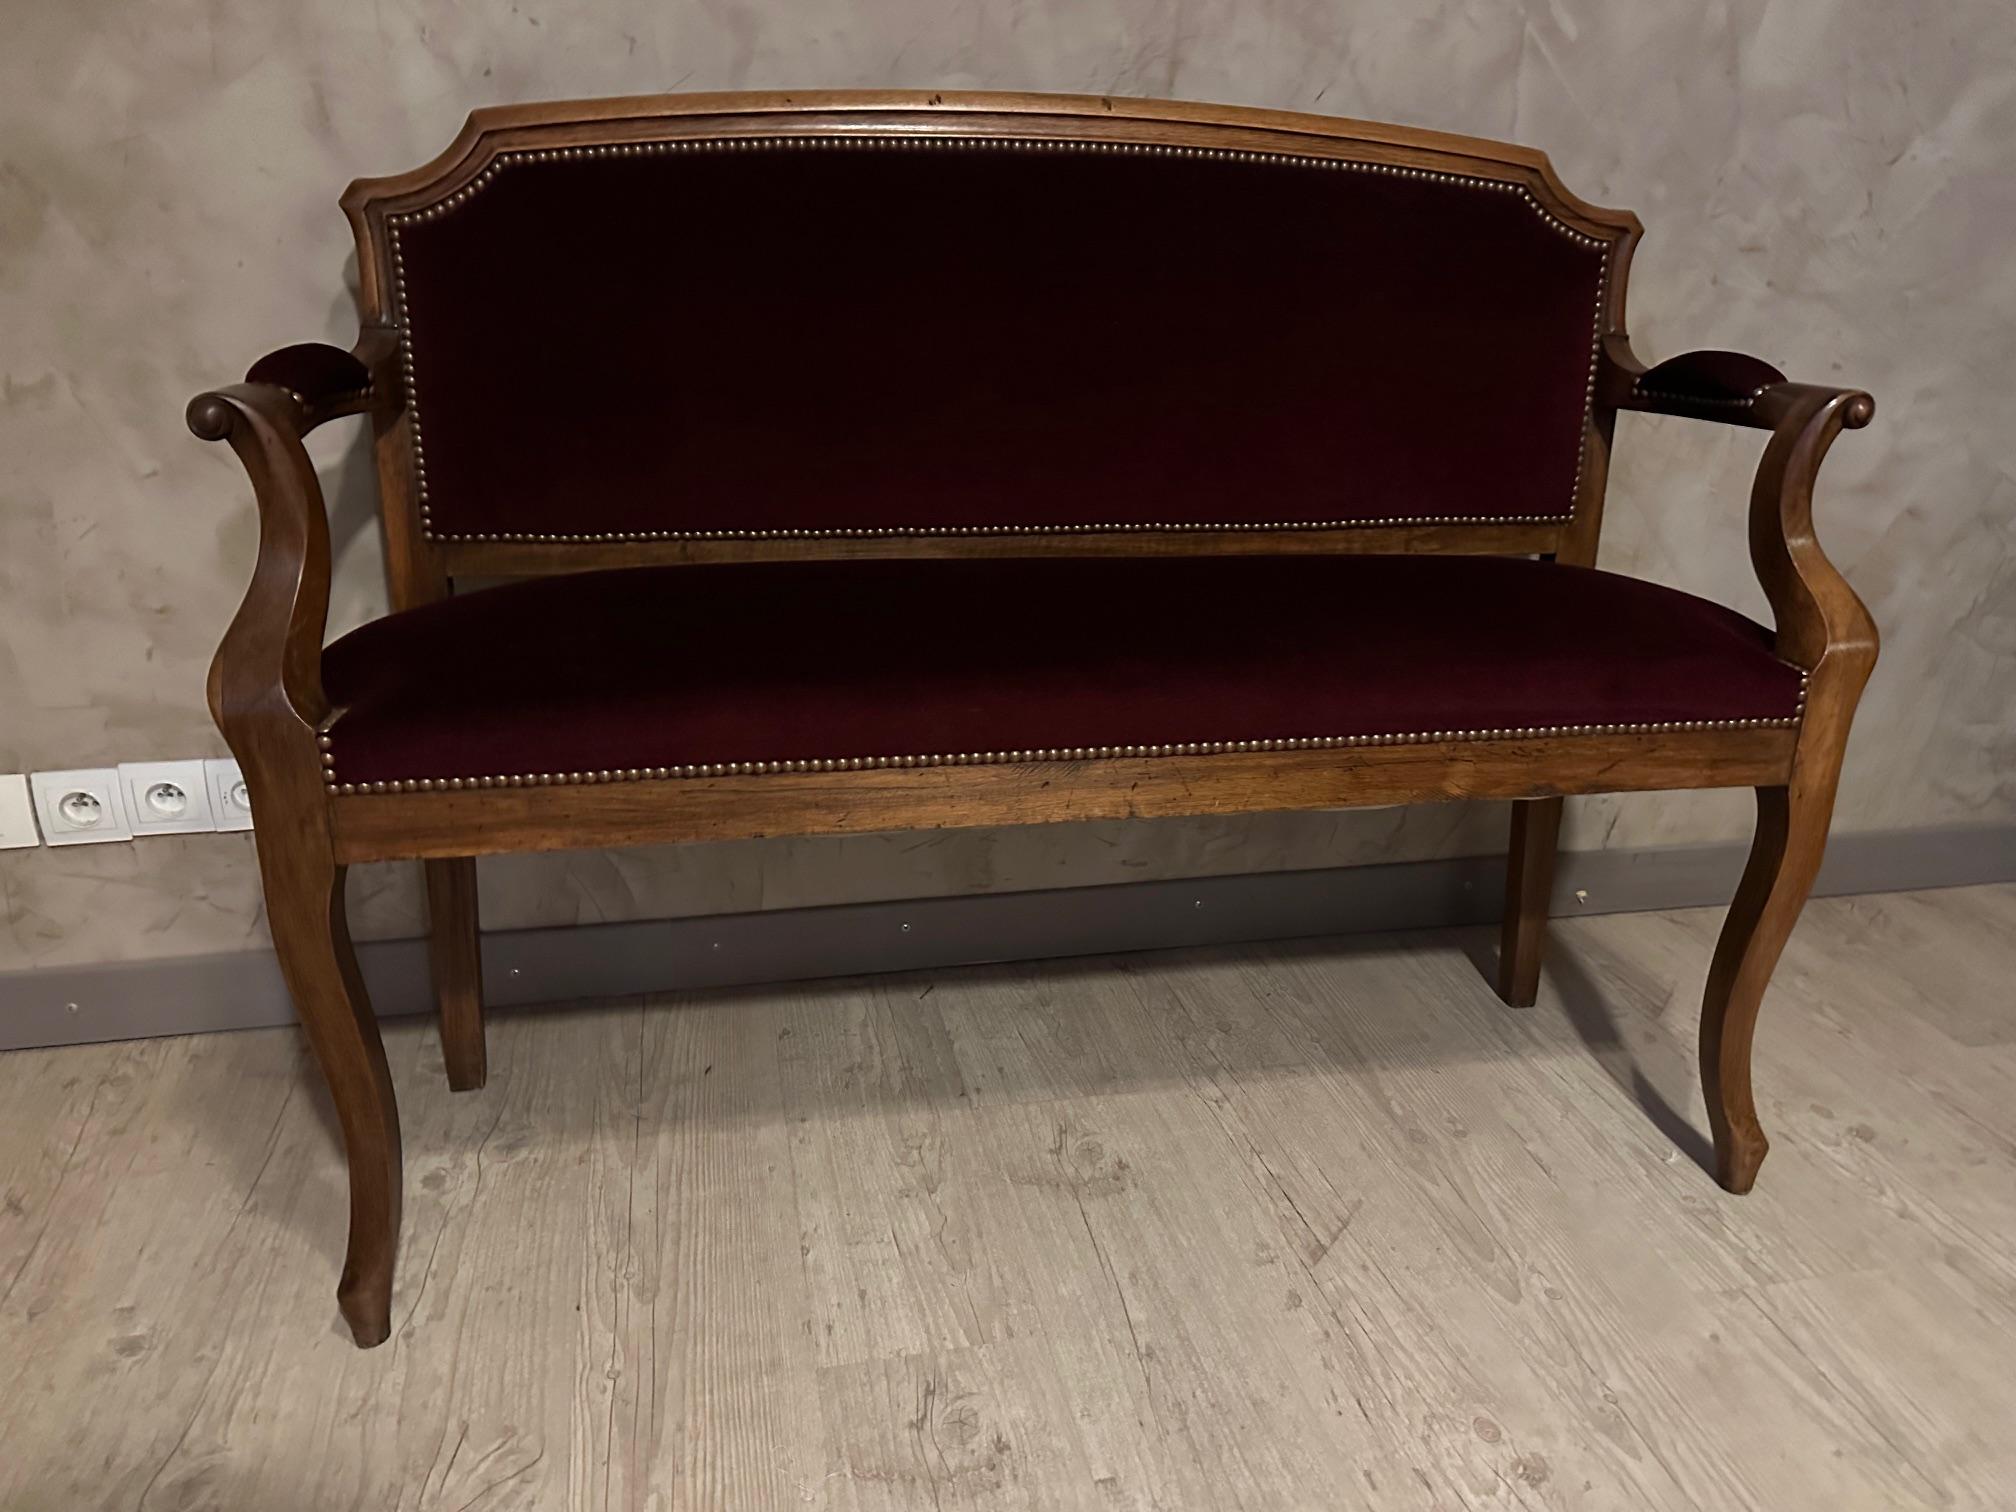 Small two-seater Louis Philippe bench in burgundy velvet in very good condition.
ideal for an entrance or at the end of a bed.